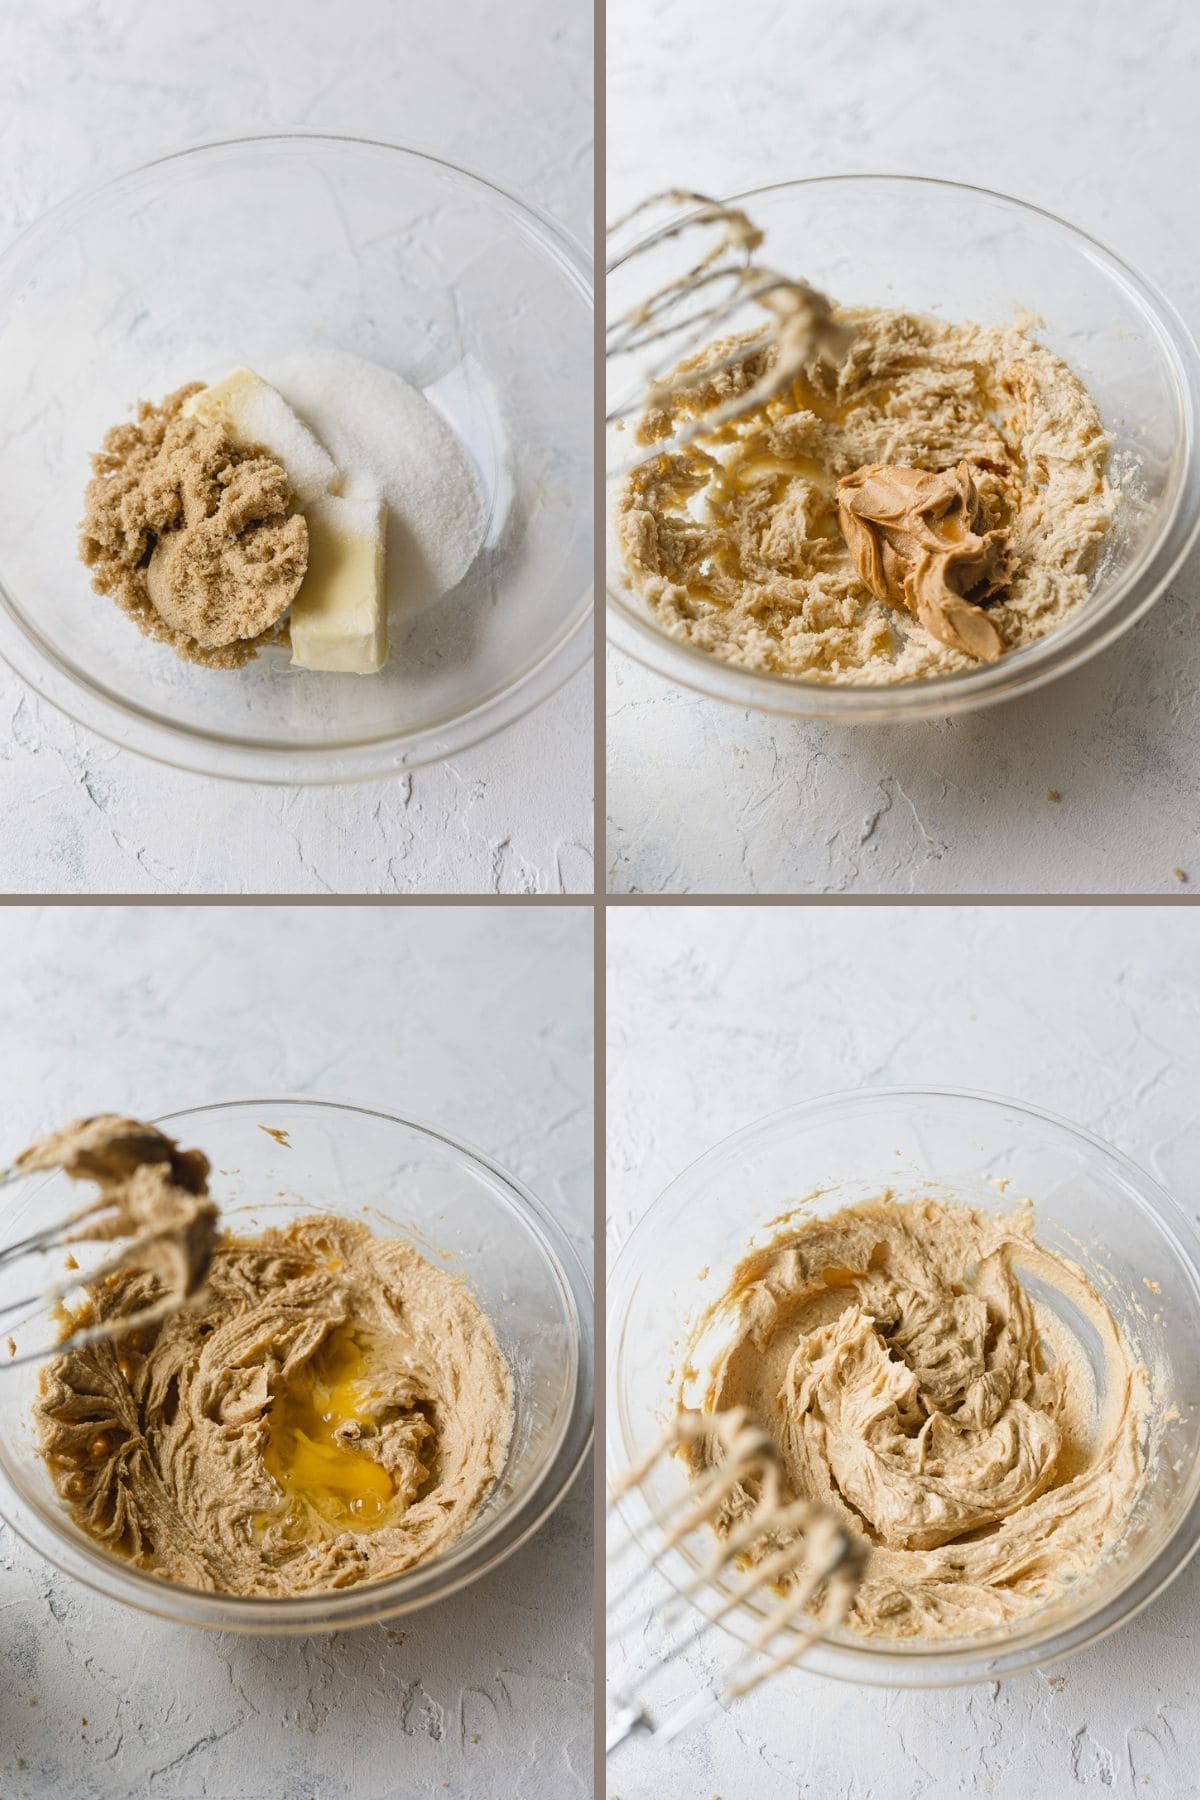 Step by step images of making peanut butter cookie dough.